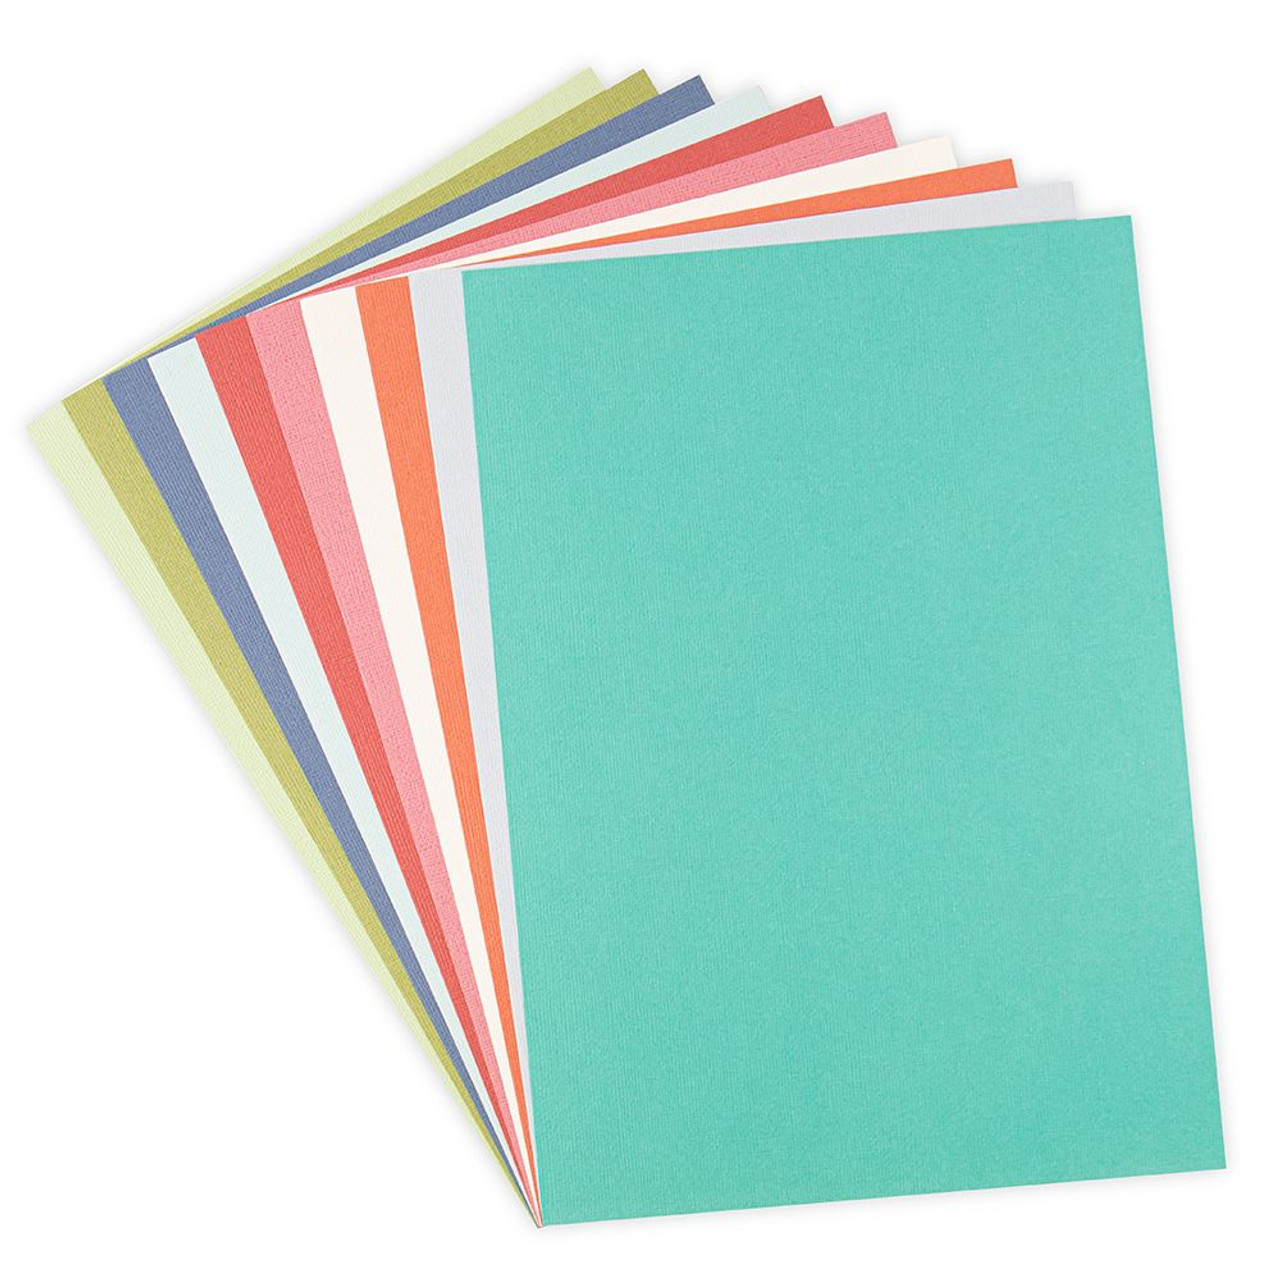 Sizzix Surfacez, Colored Cardstock 60PK - Botanical Colors - Scrapbooking  Made Simple